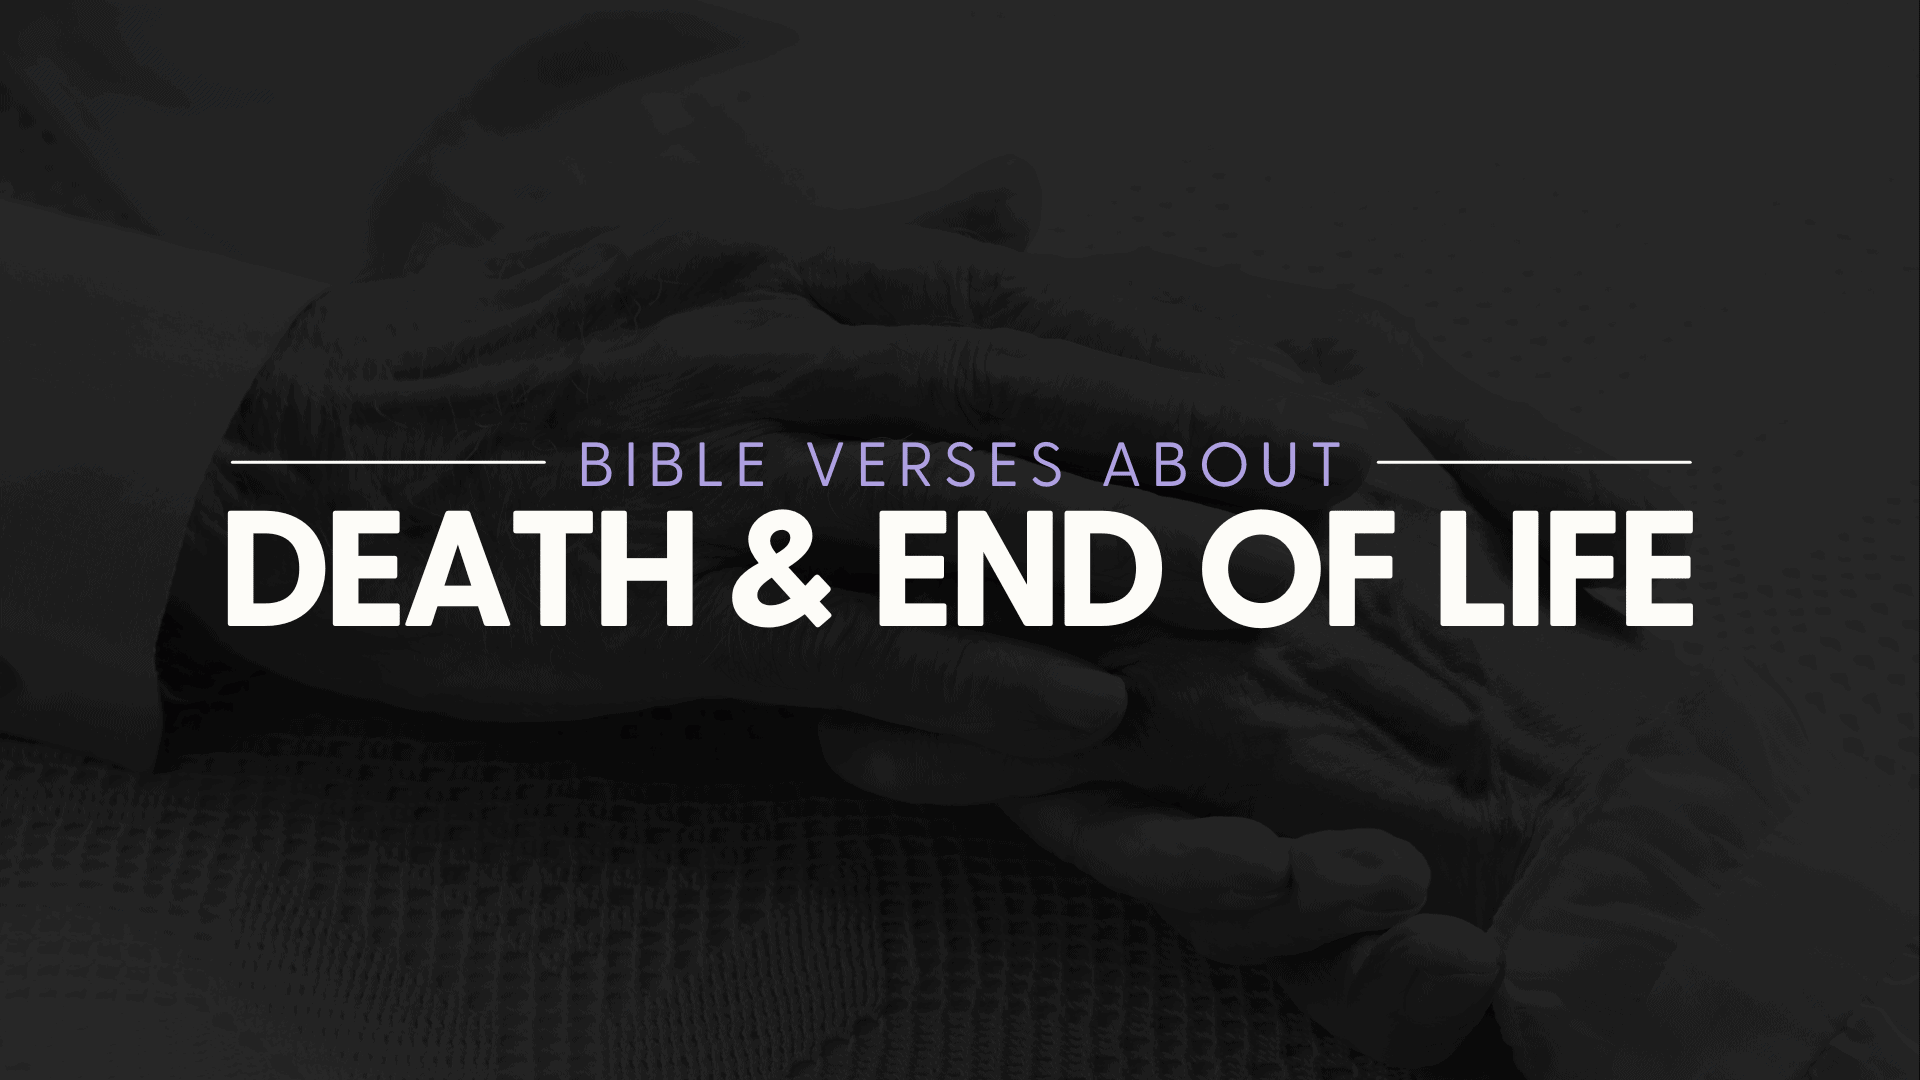 Elderly hands holding each other when dealing with death and end of life. Bible verses to encourage